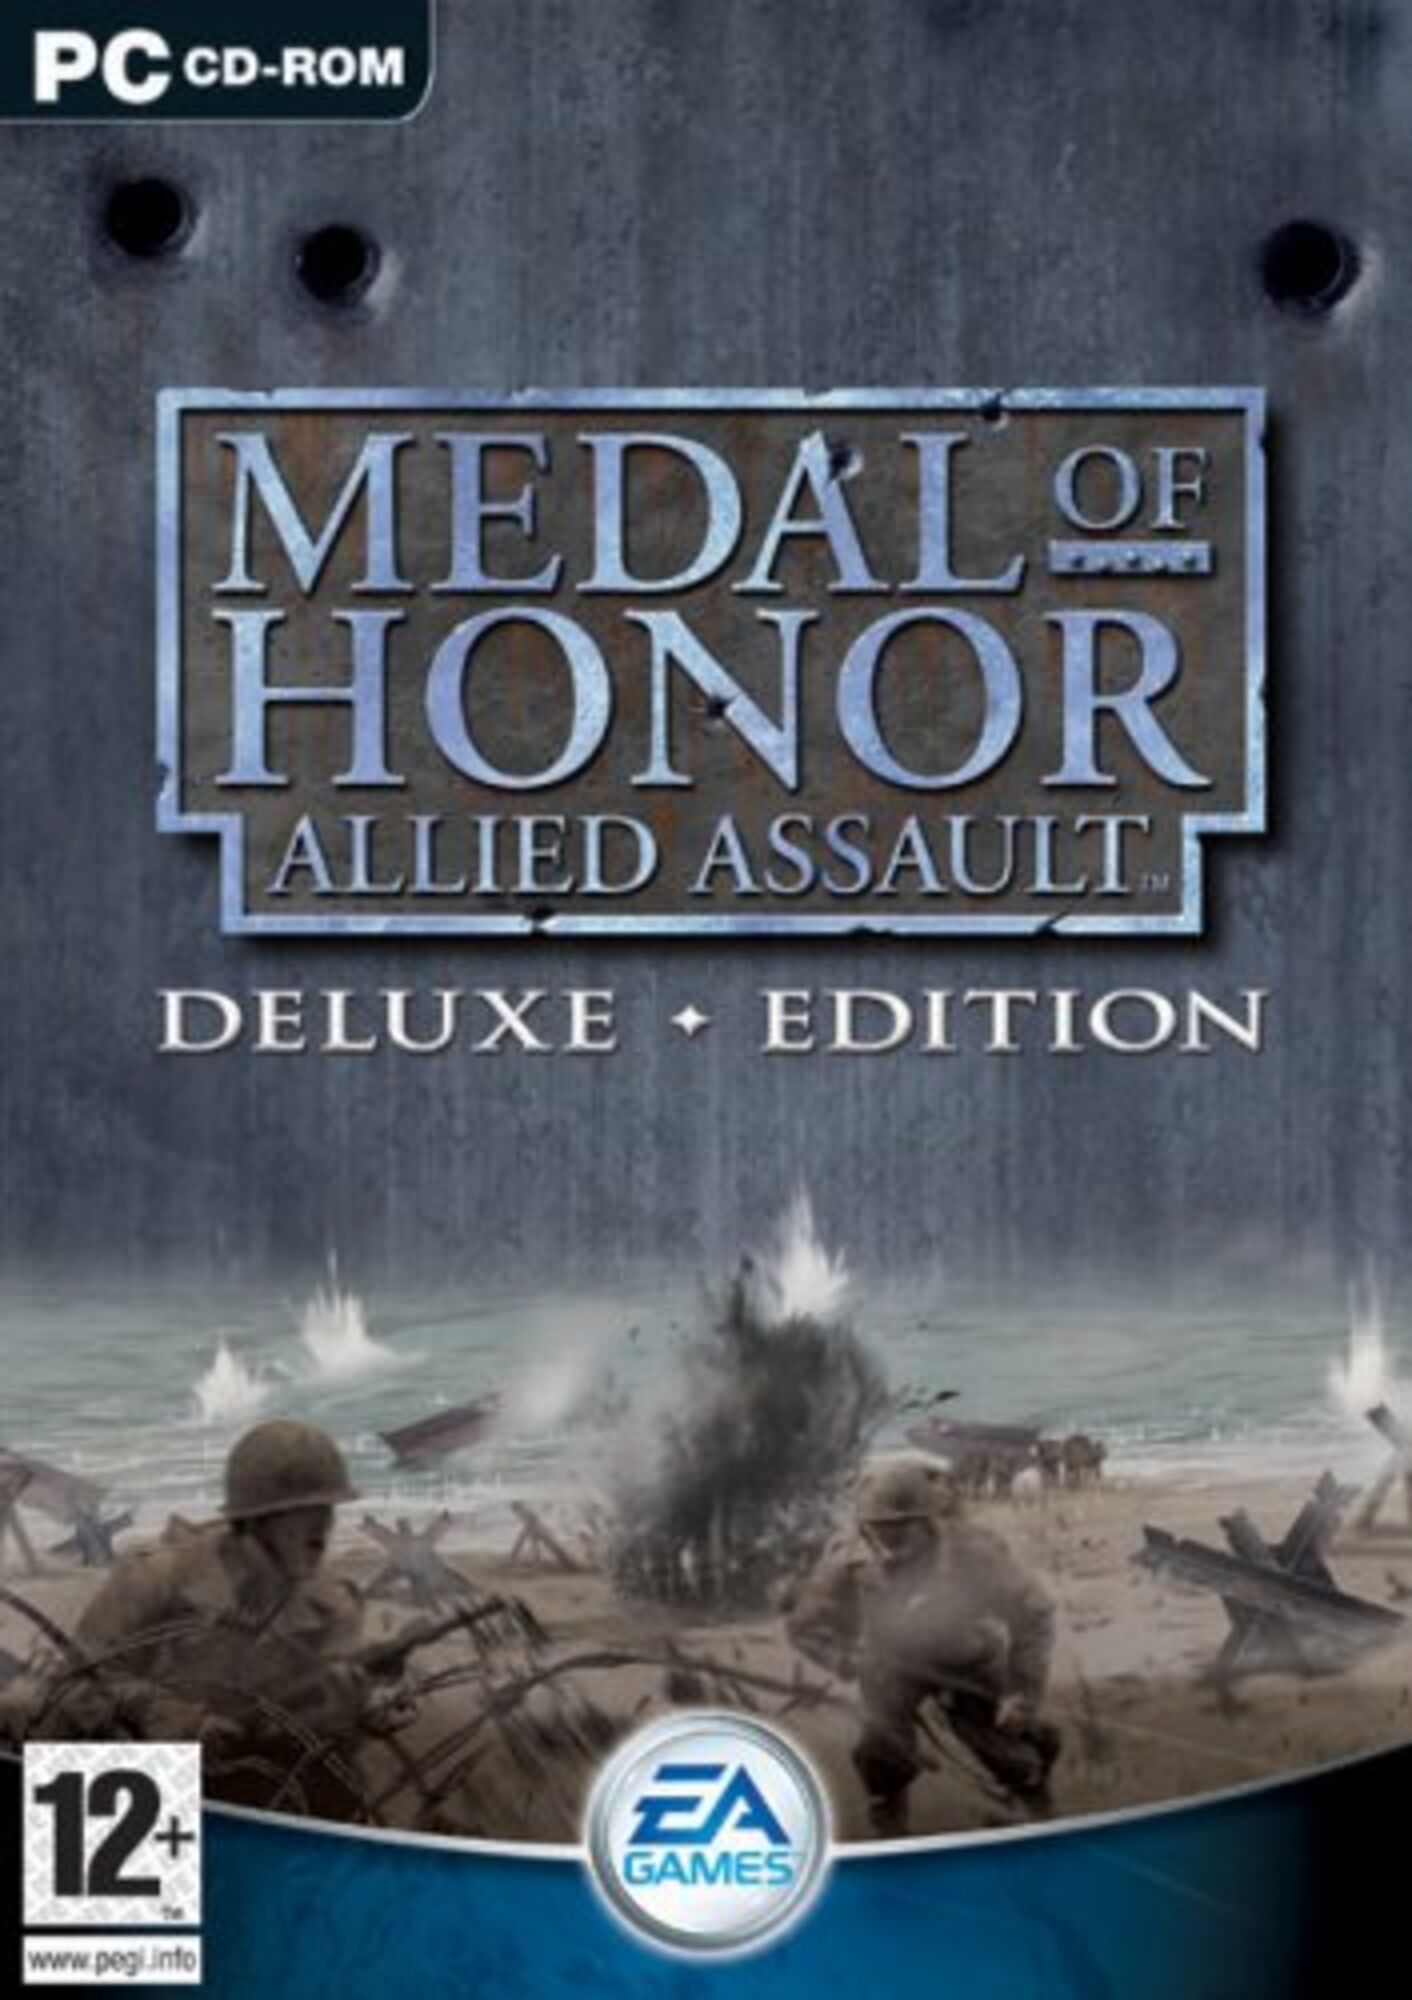 how to play medal of honor allied assault online